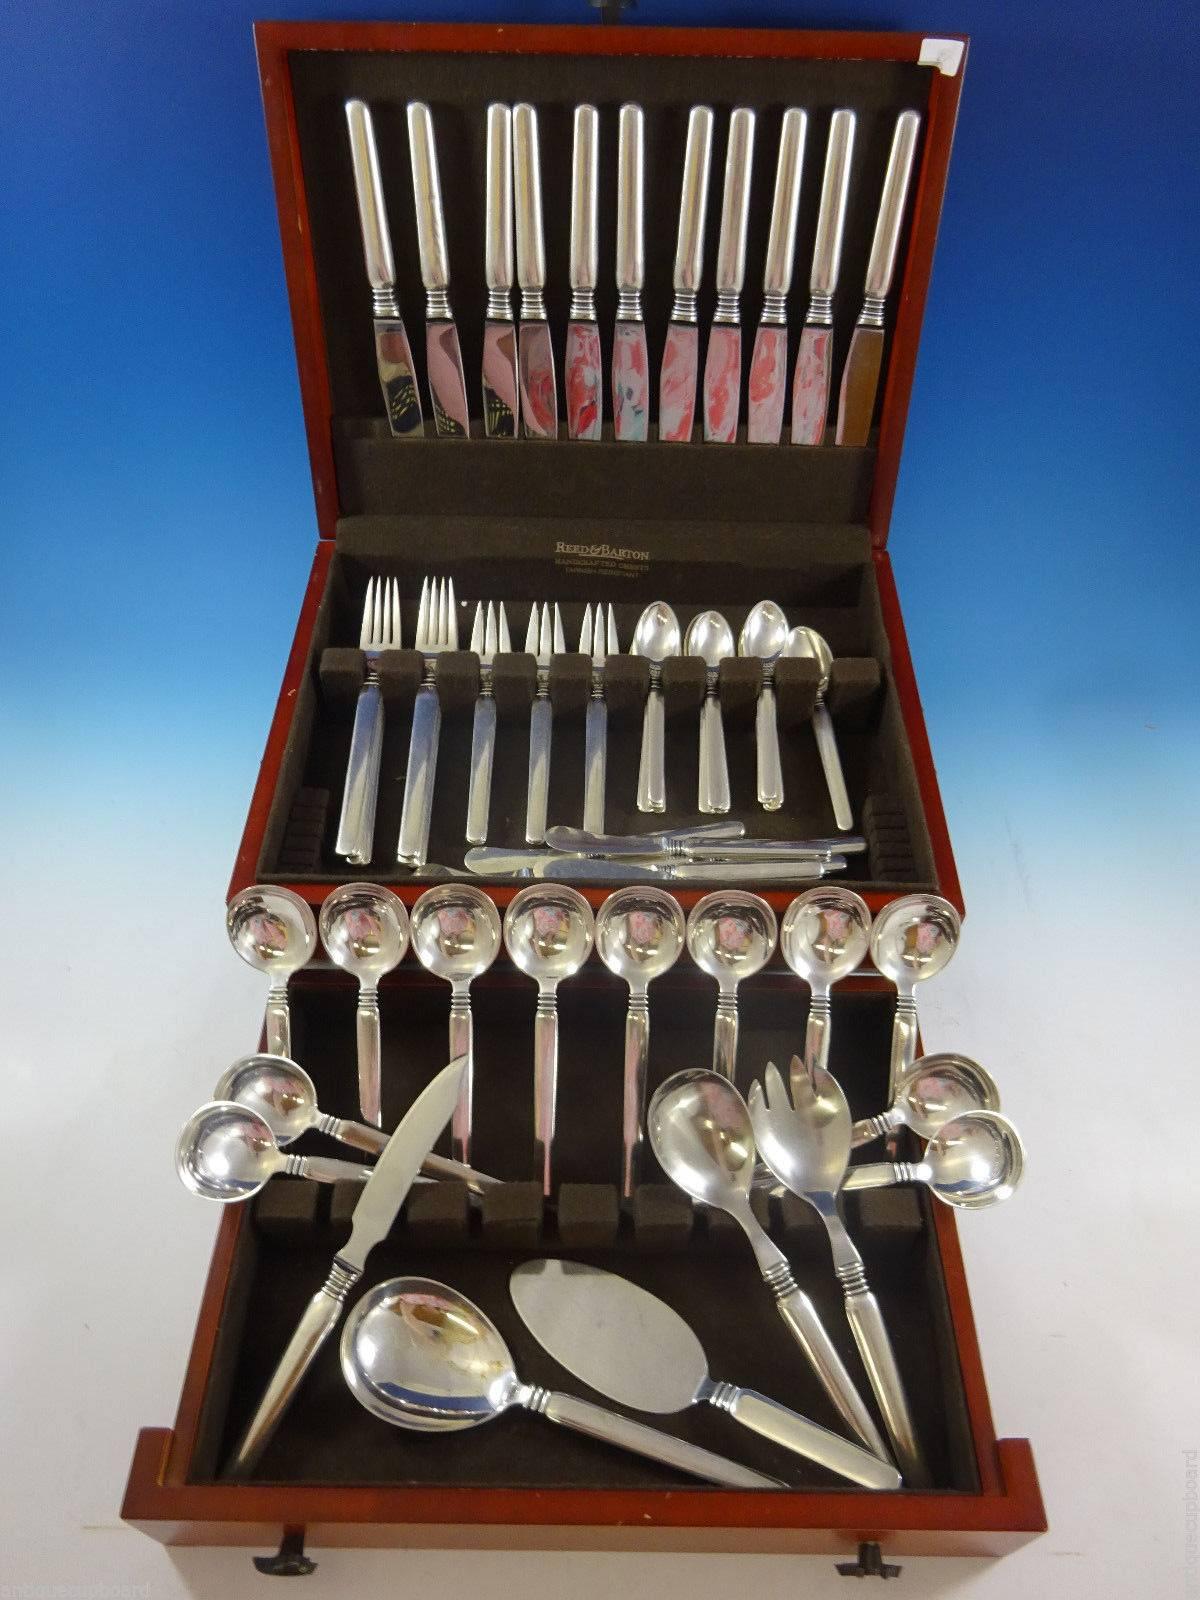 Windsor by W&S Sorensen Danish sterling silver flatware set, 87 pieces. This set includes: 12 dinner knives, 9 1/2